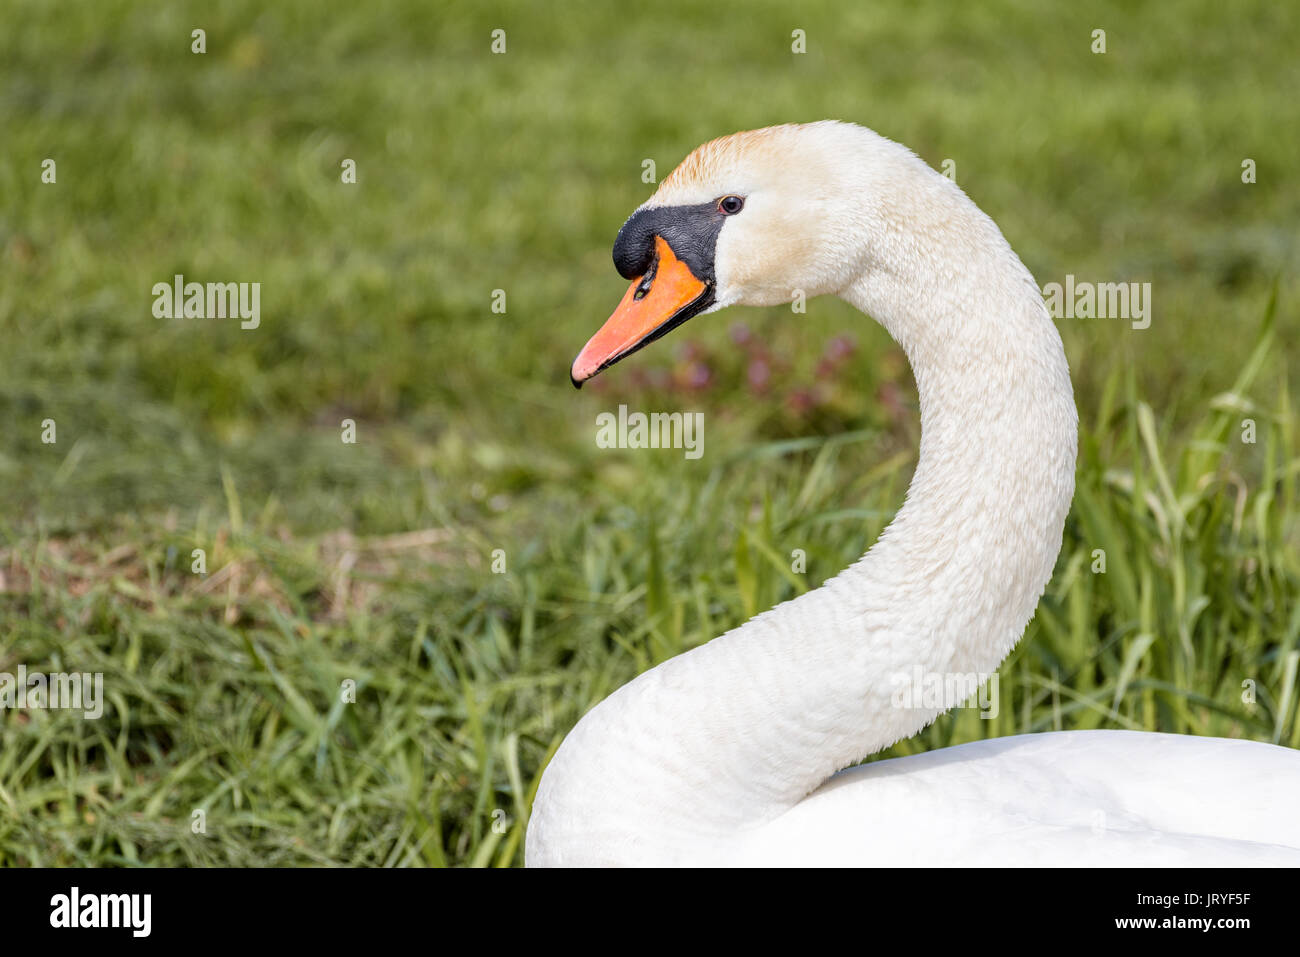 En profil portrait of a mute swan isolated on a background of green grass. The swan is attentive and watching. Stock Photo